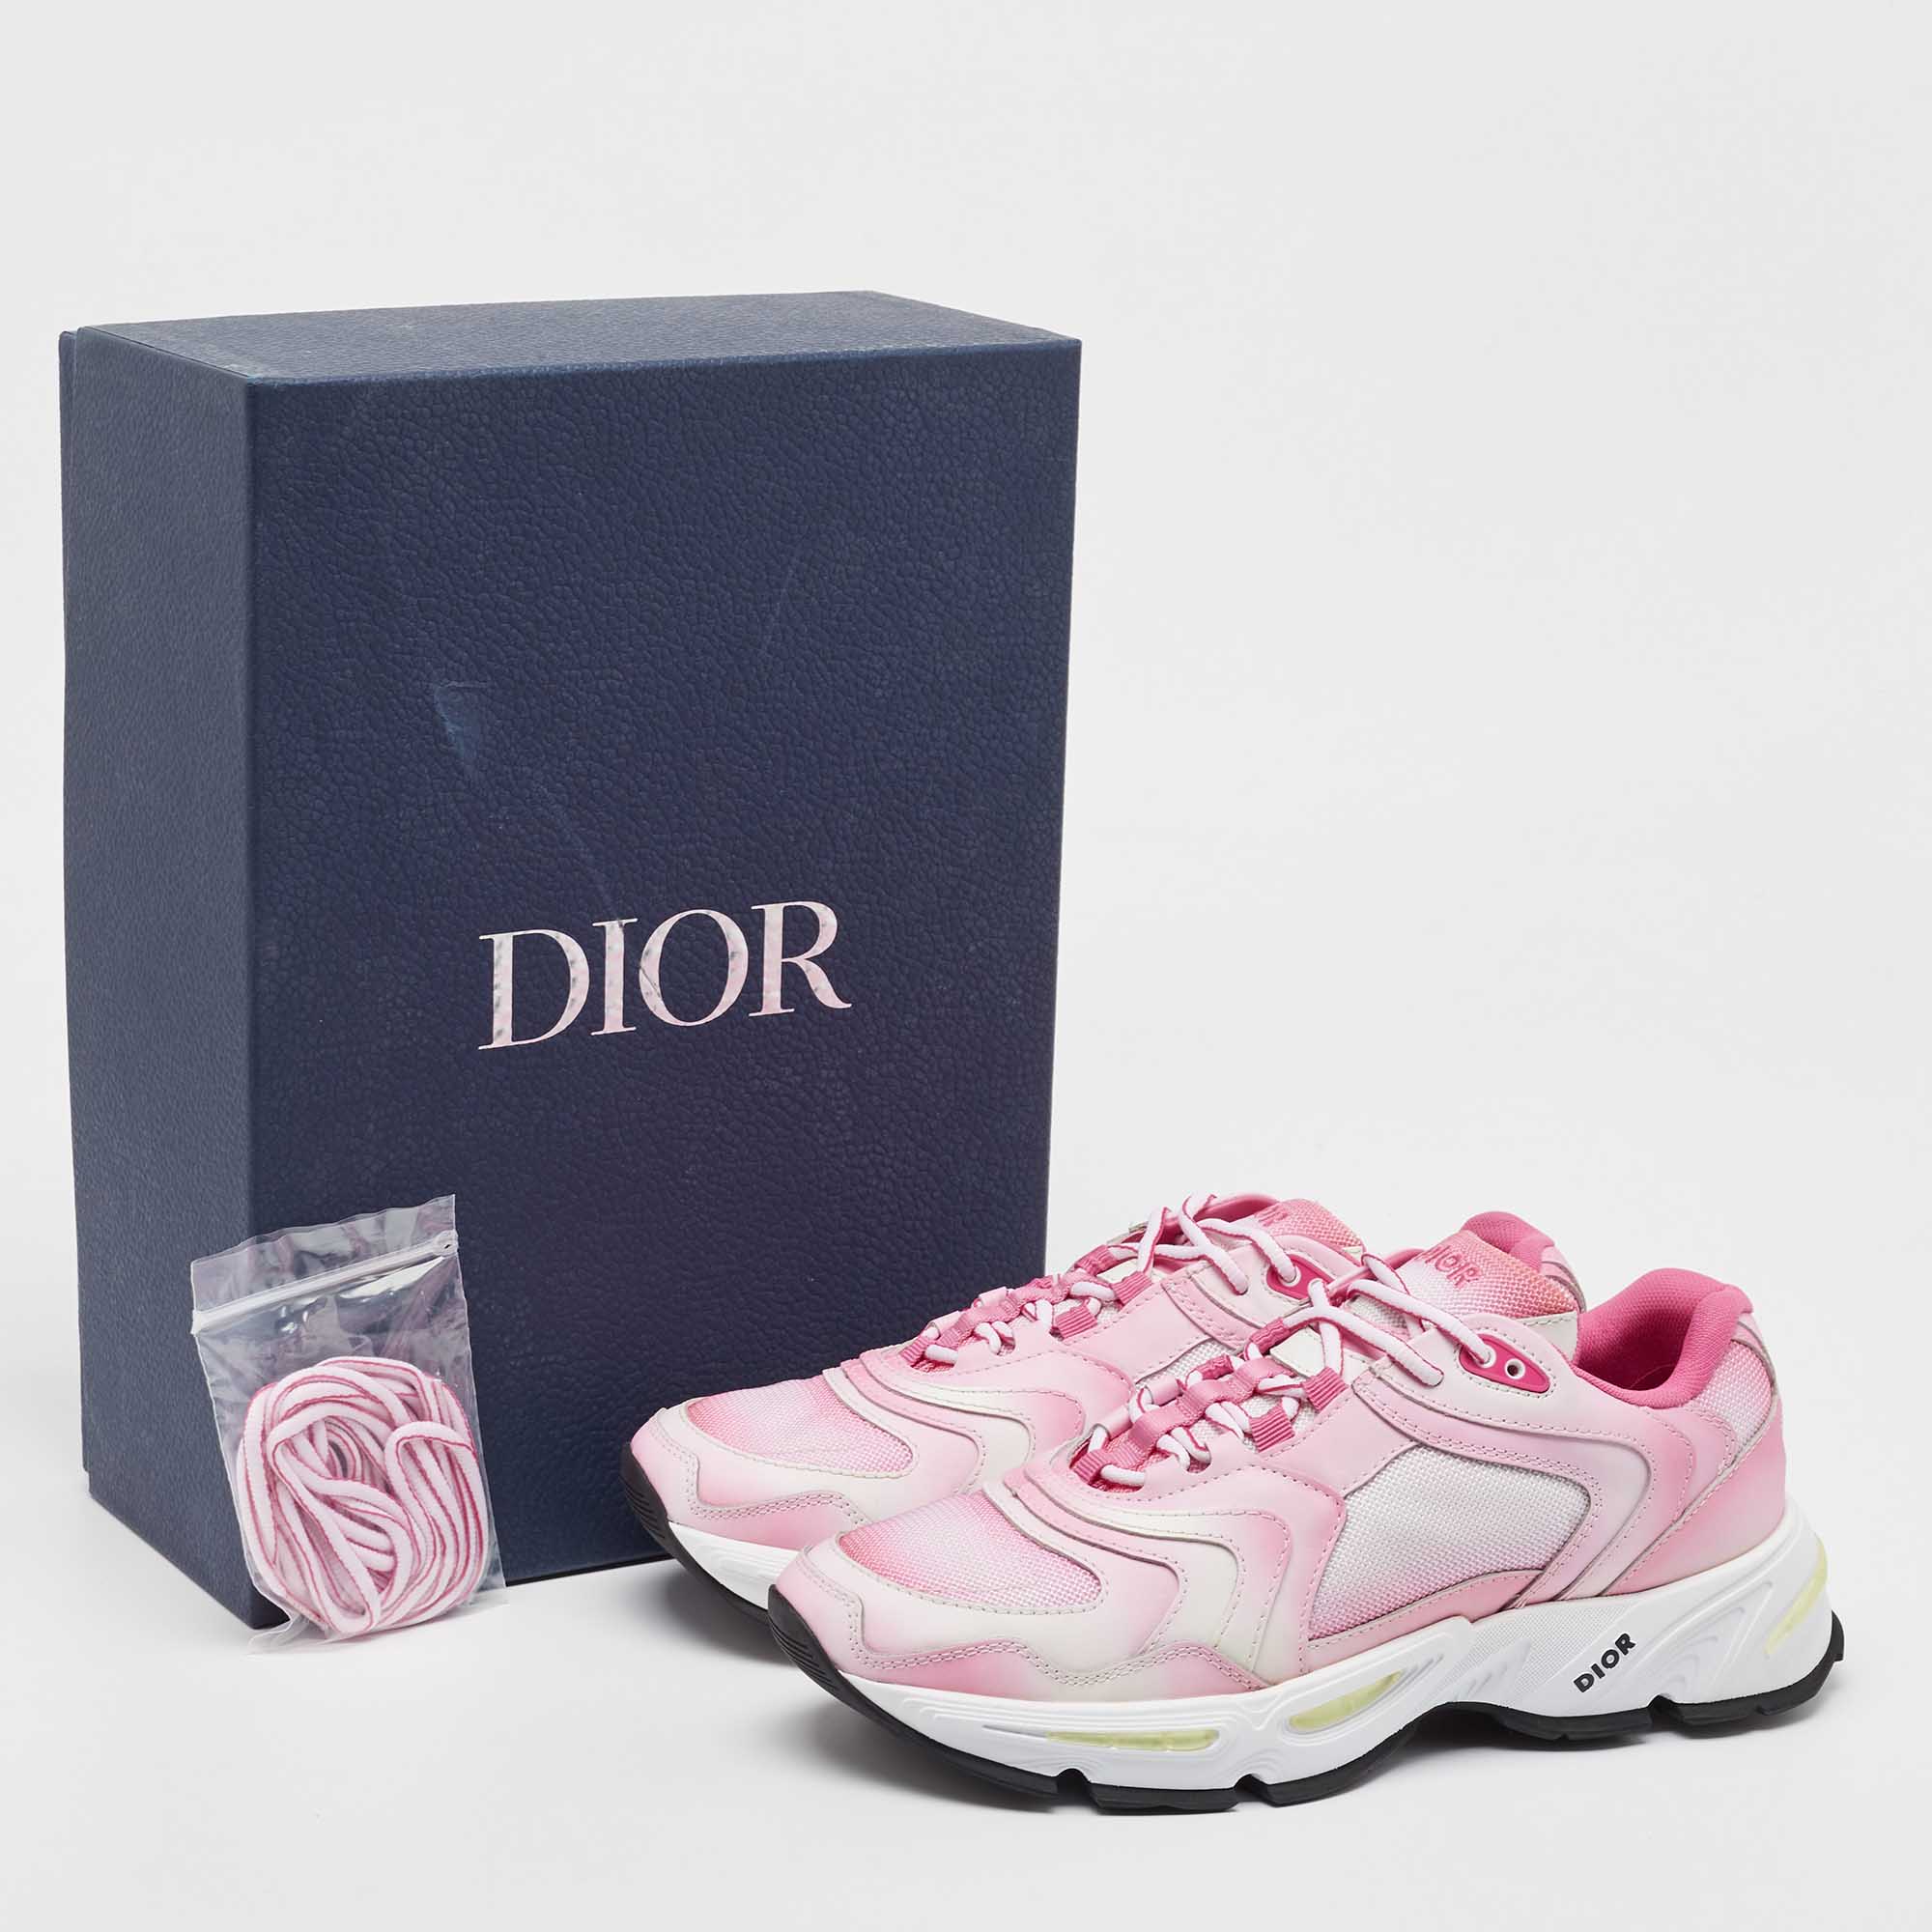 DIOR Pink/White Mesh And Leather CD1 Gradient Sneakers Size 41